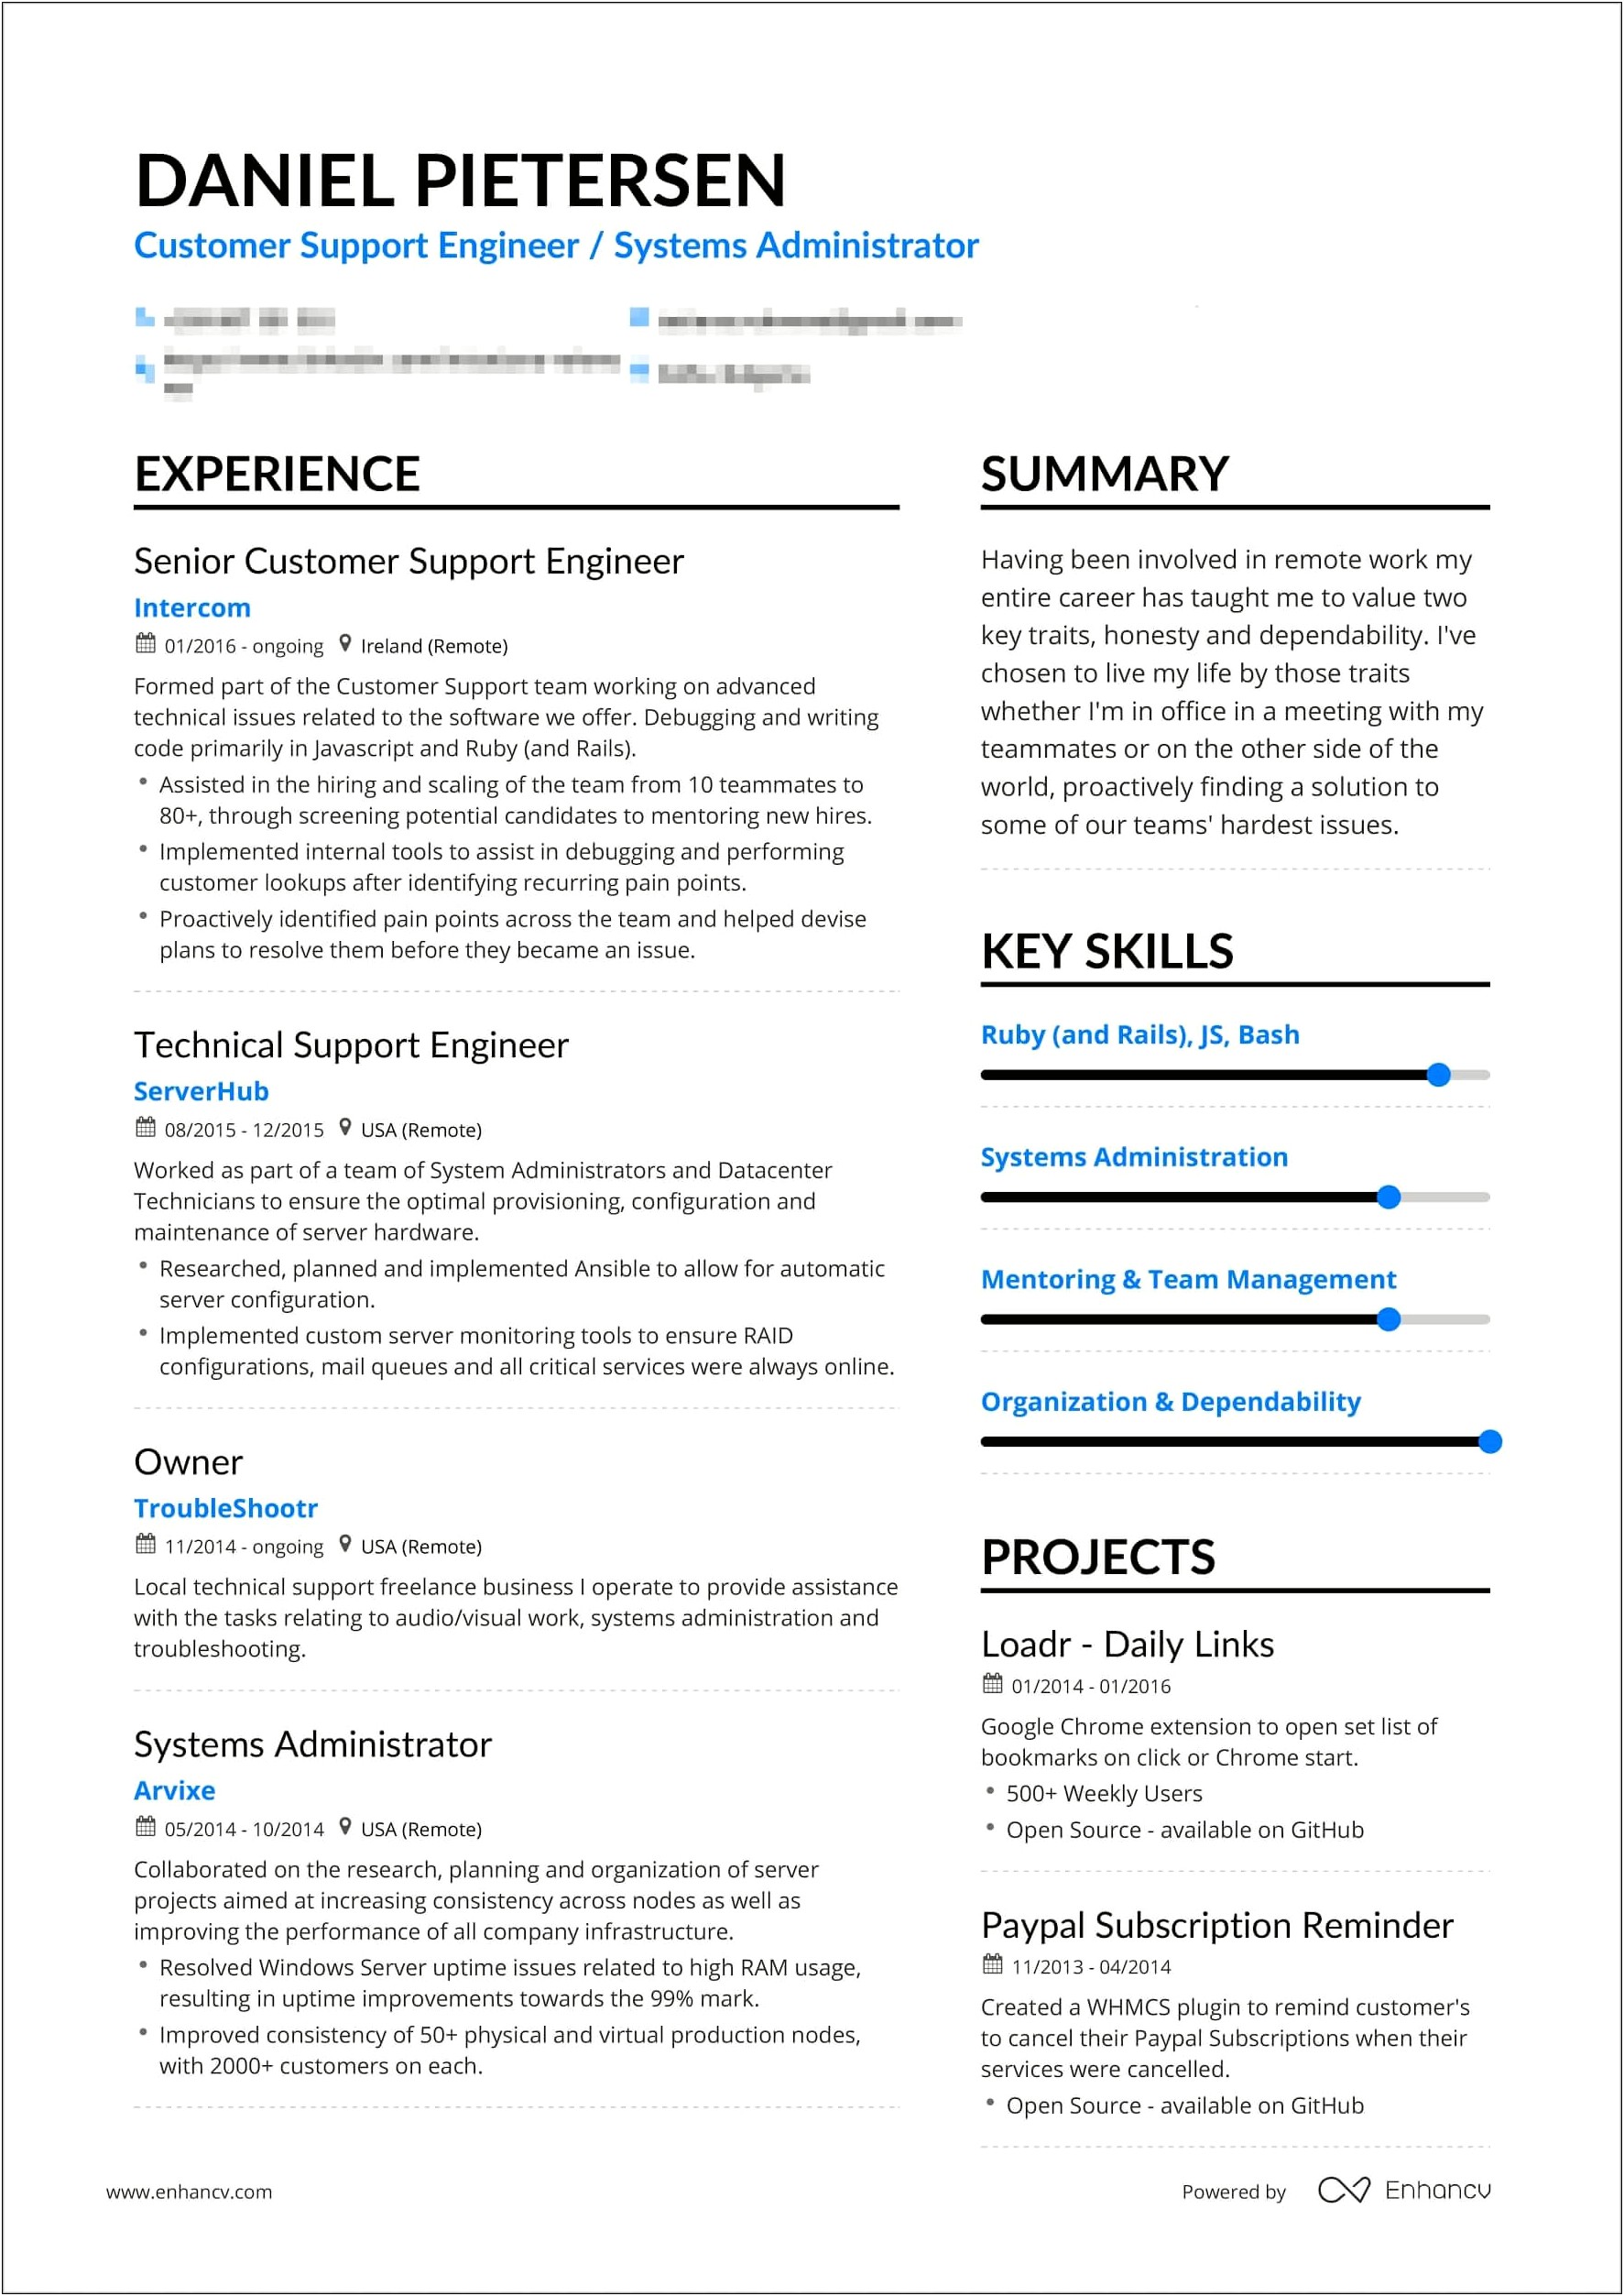 Are Skills And Qualifications Both On A Resume